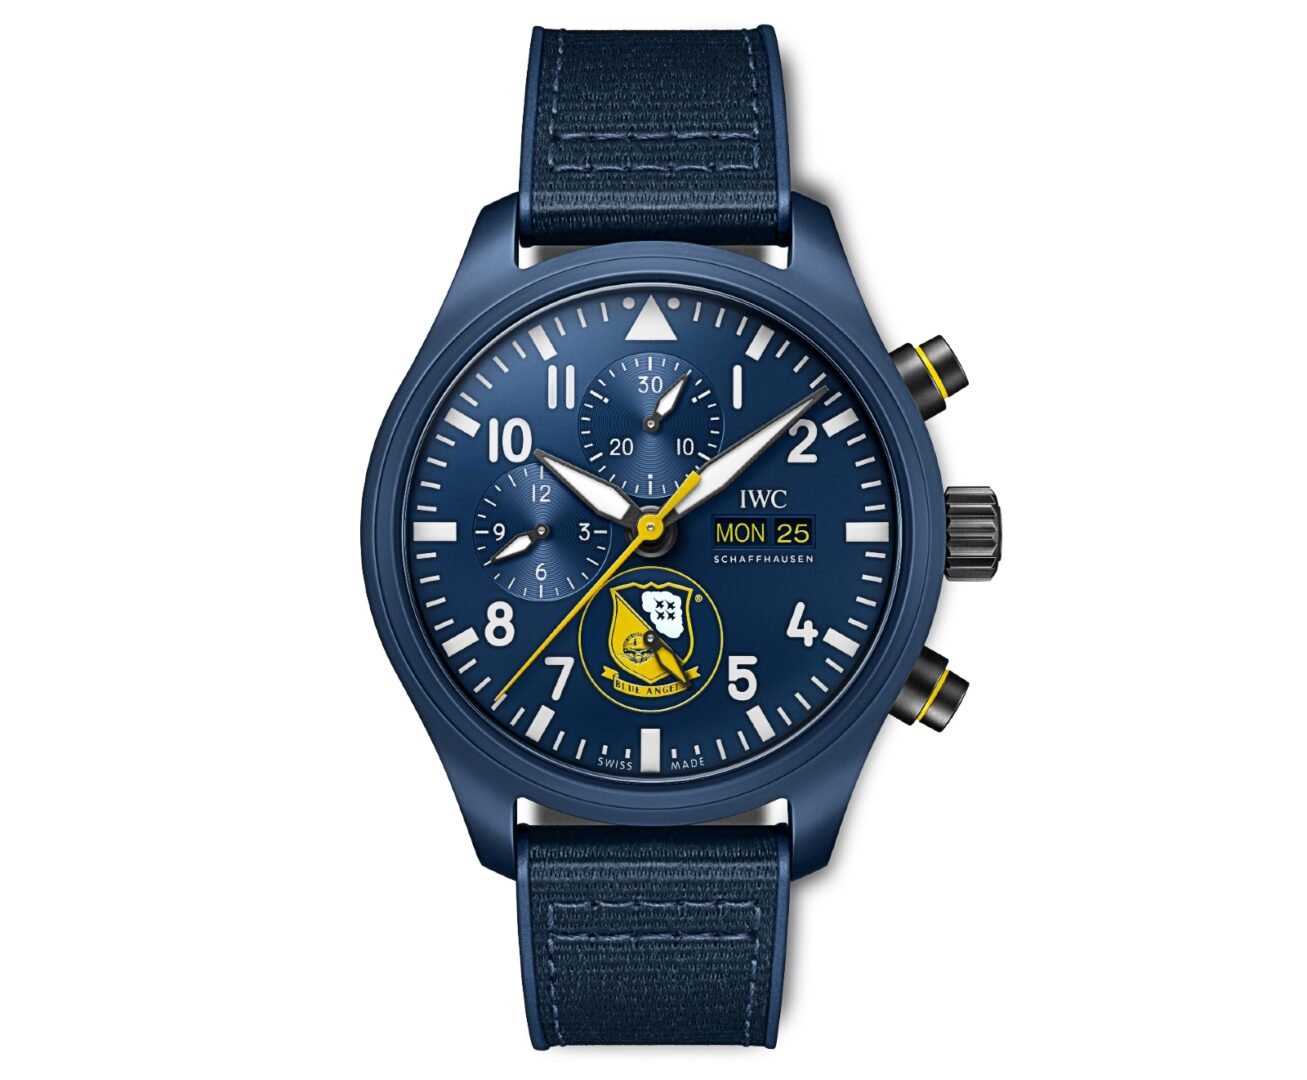 IWC Pilot's Watch Chronograph Edition "Blue Angels" (Ref. IW389109)